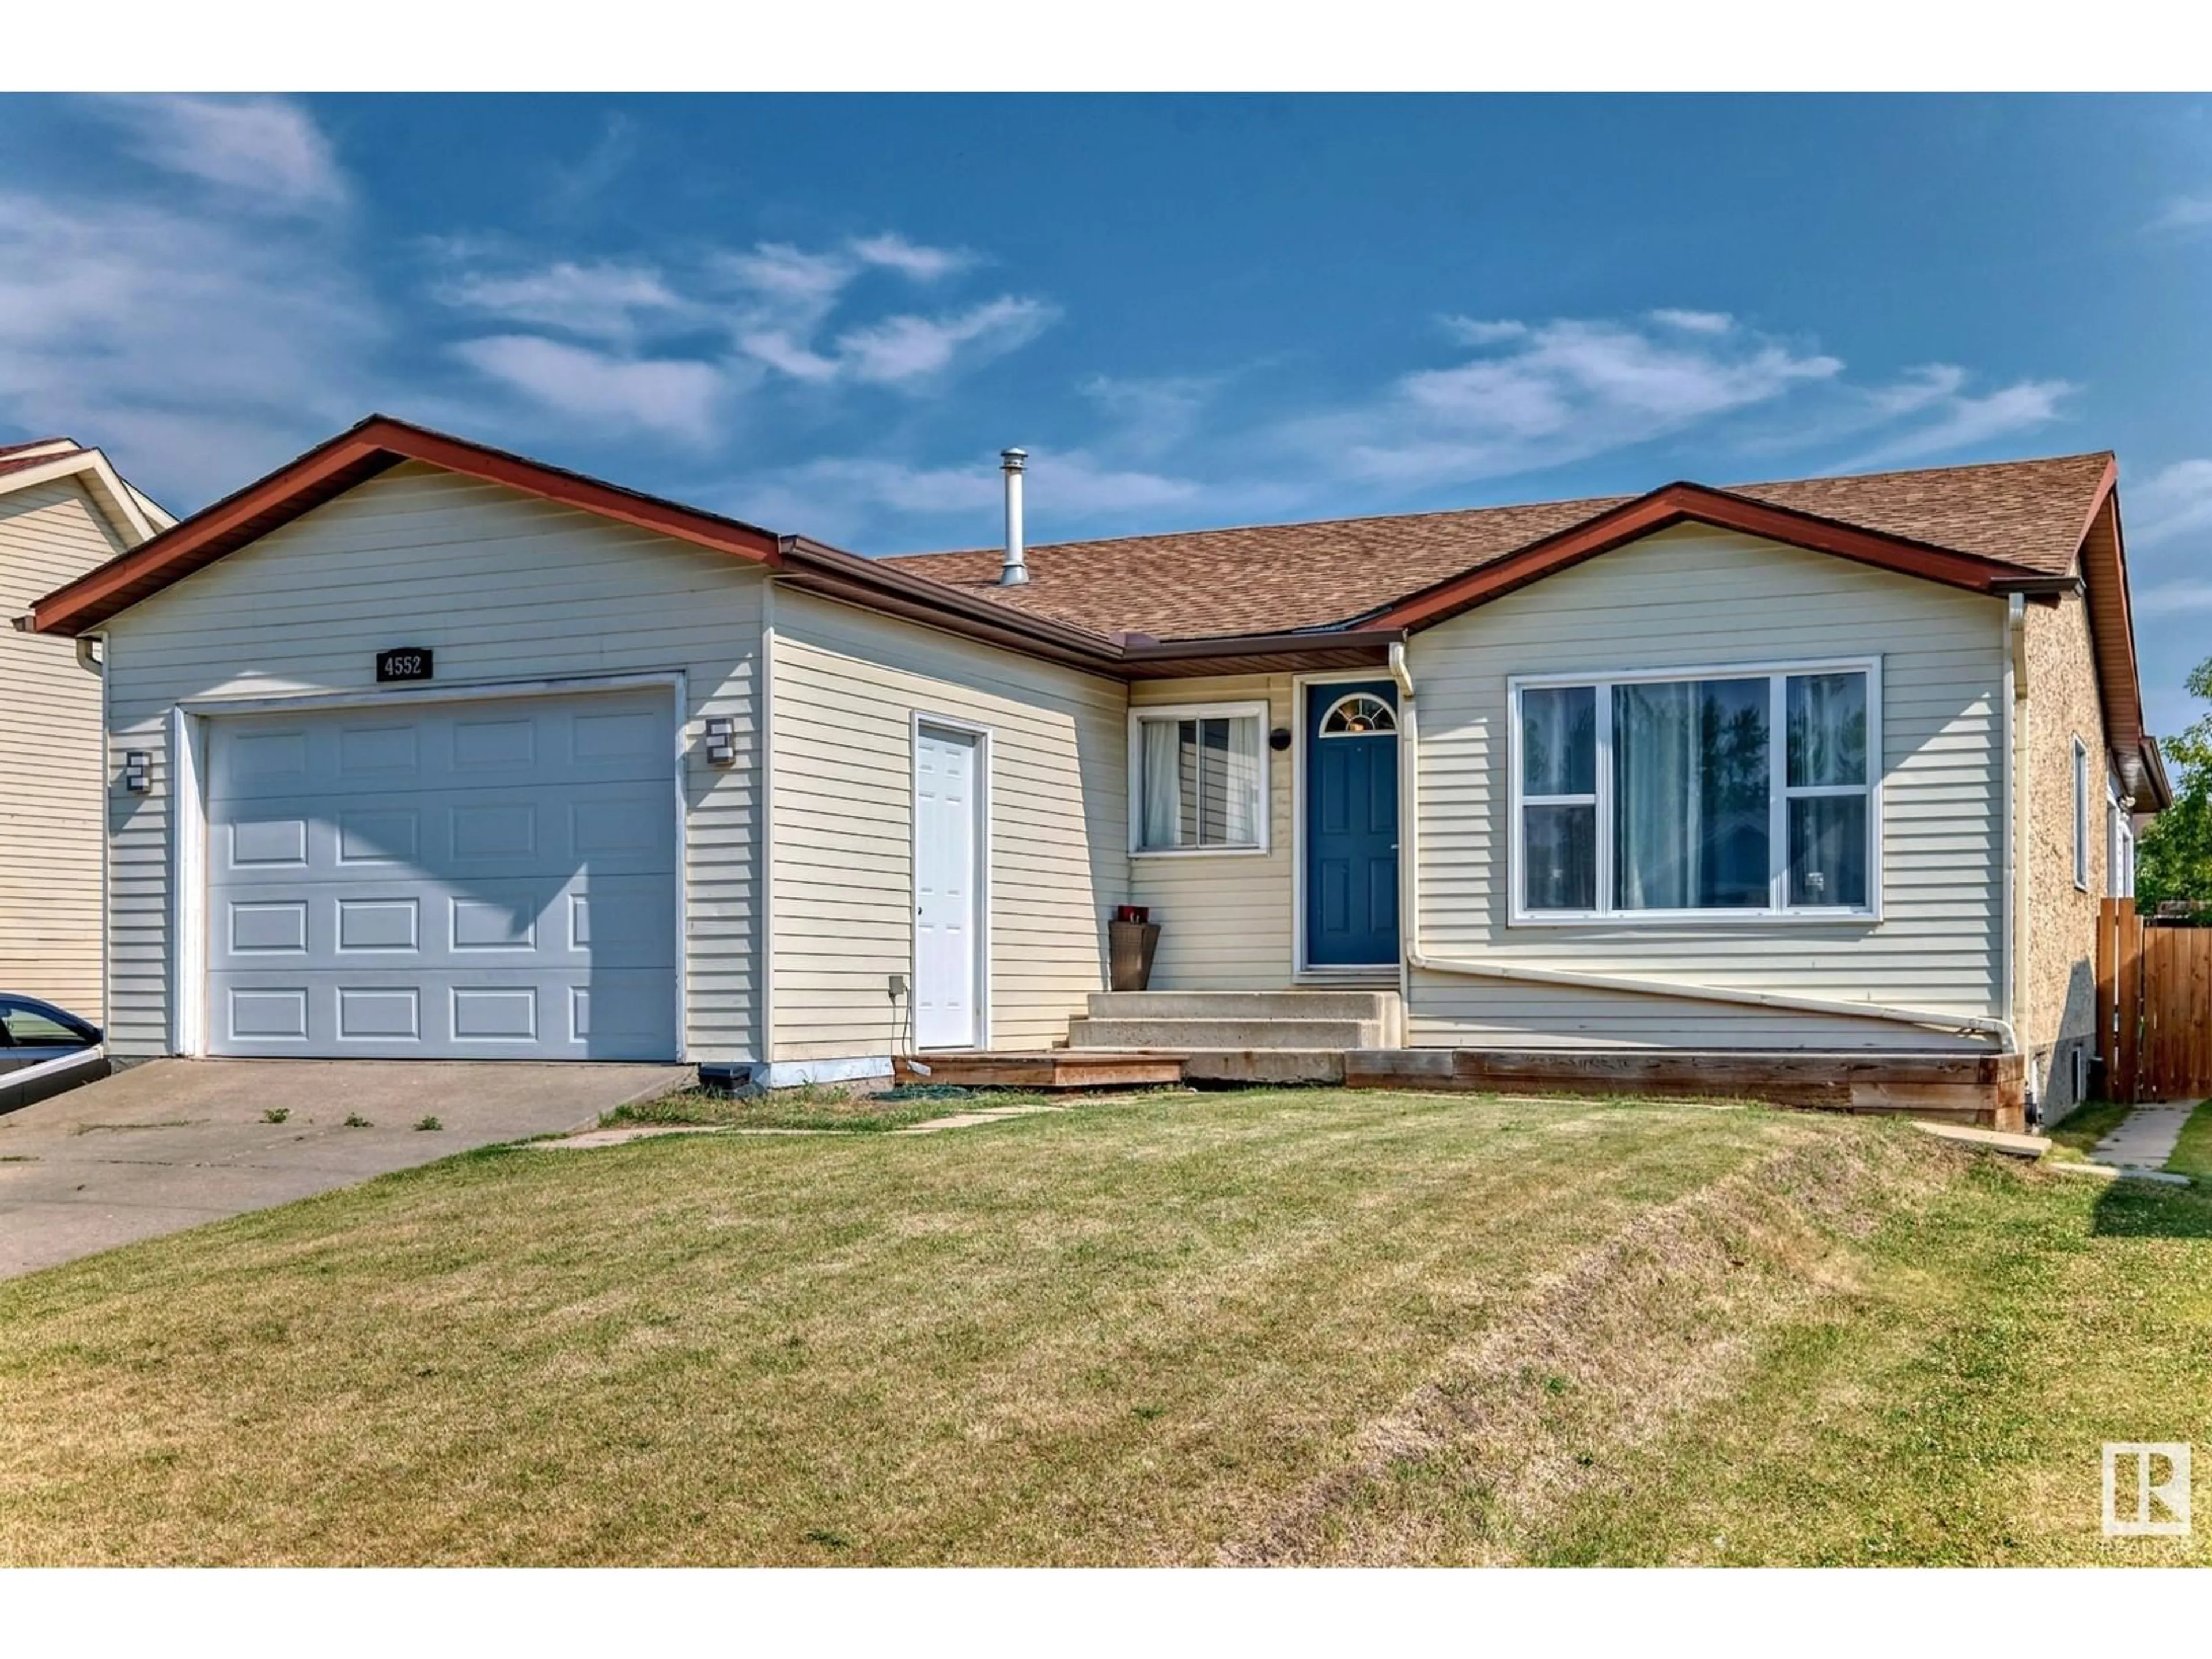 Frontside or backside of a home for 4552 35 ave NW, Edmonton Alberta T6L4X5